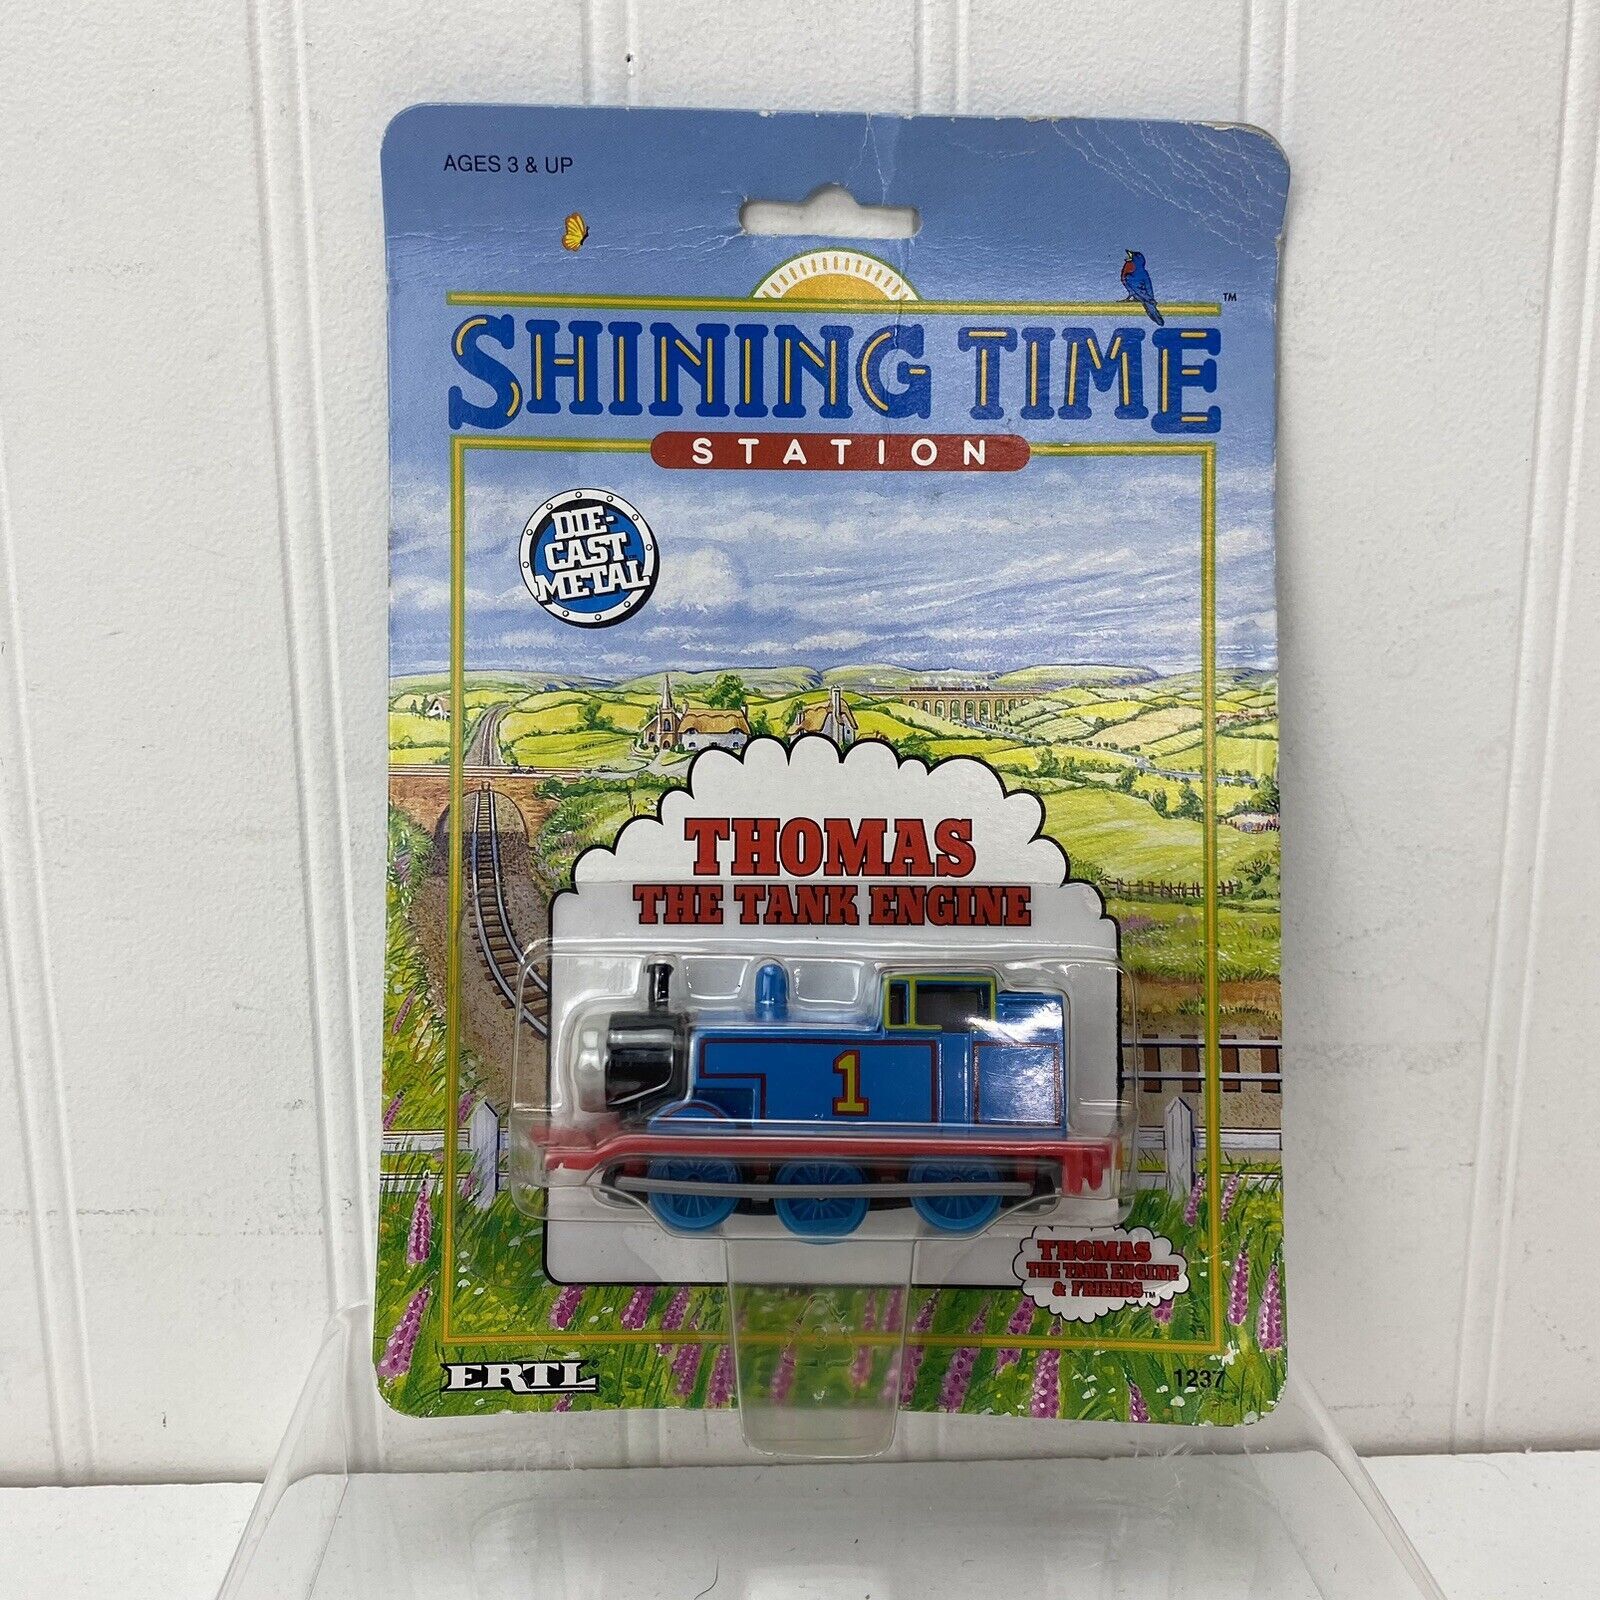 Primary image for 1992 Ertl Shining Time Station #1237 Diecast Thomas The Tank Engine On Card